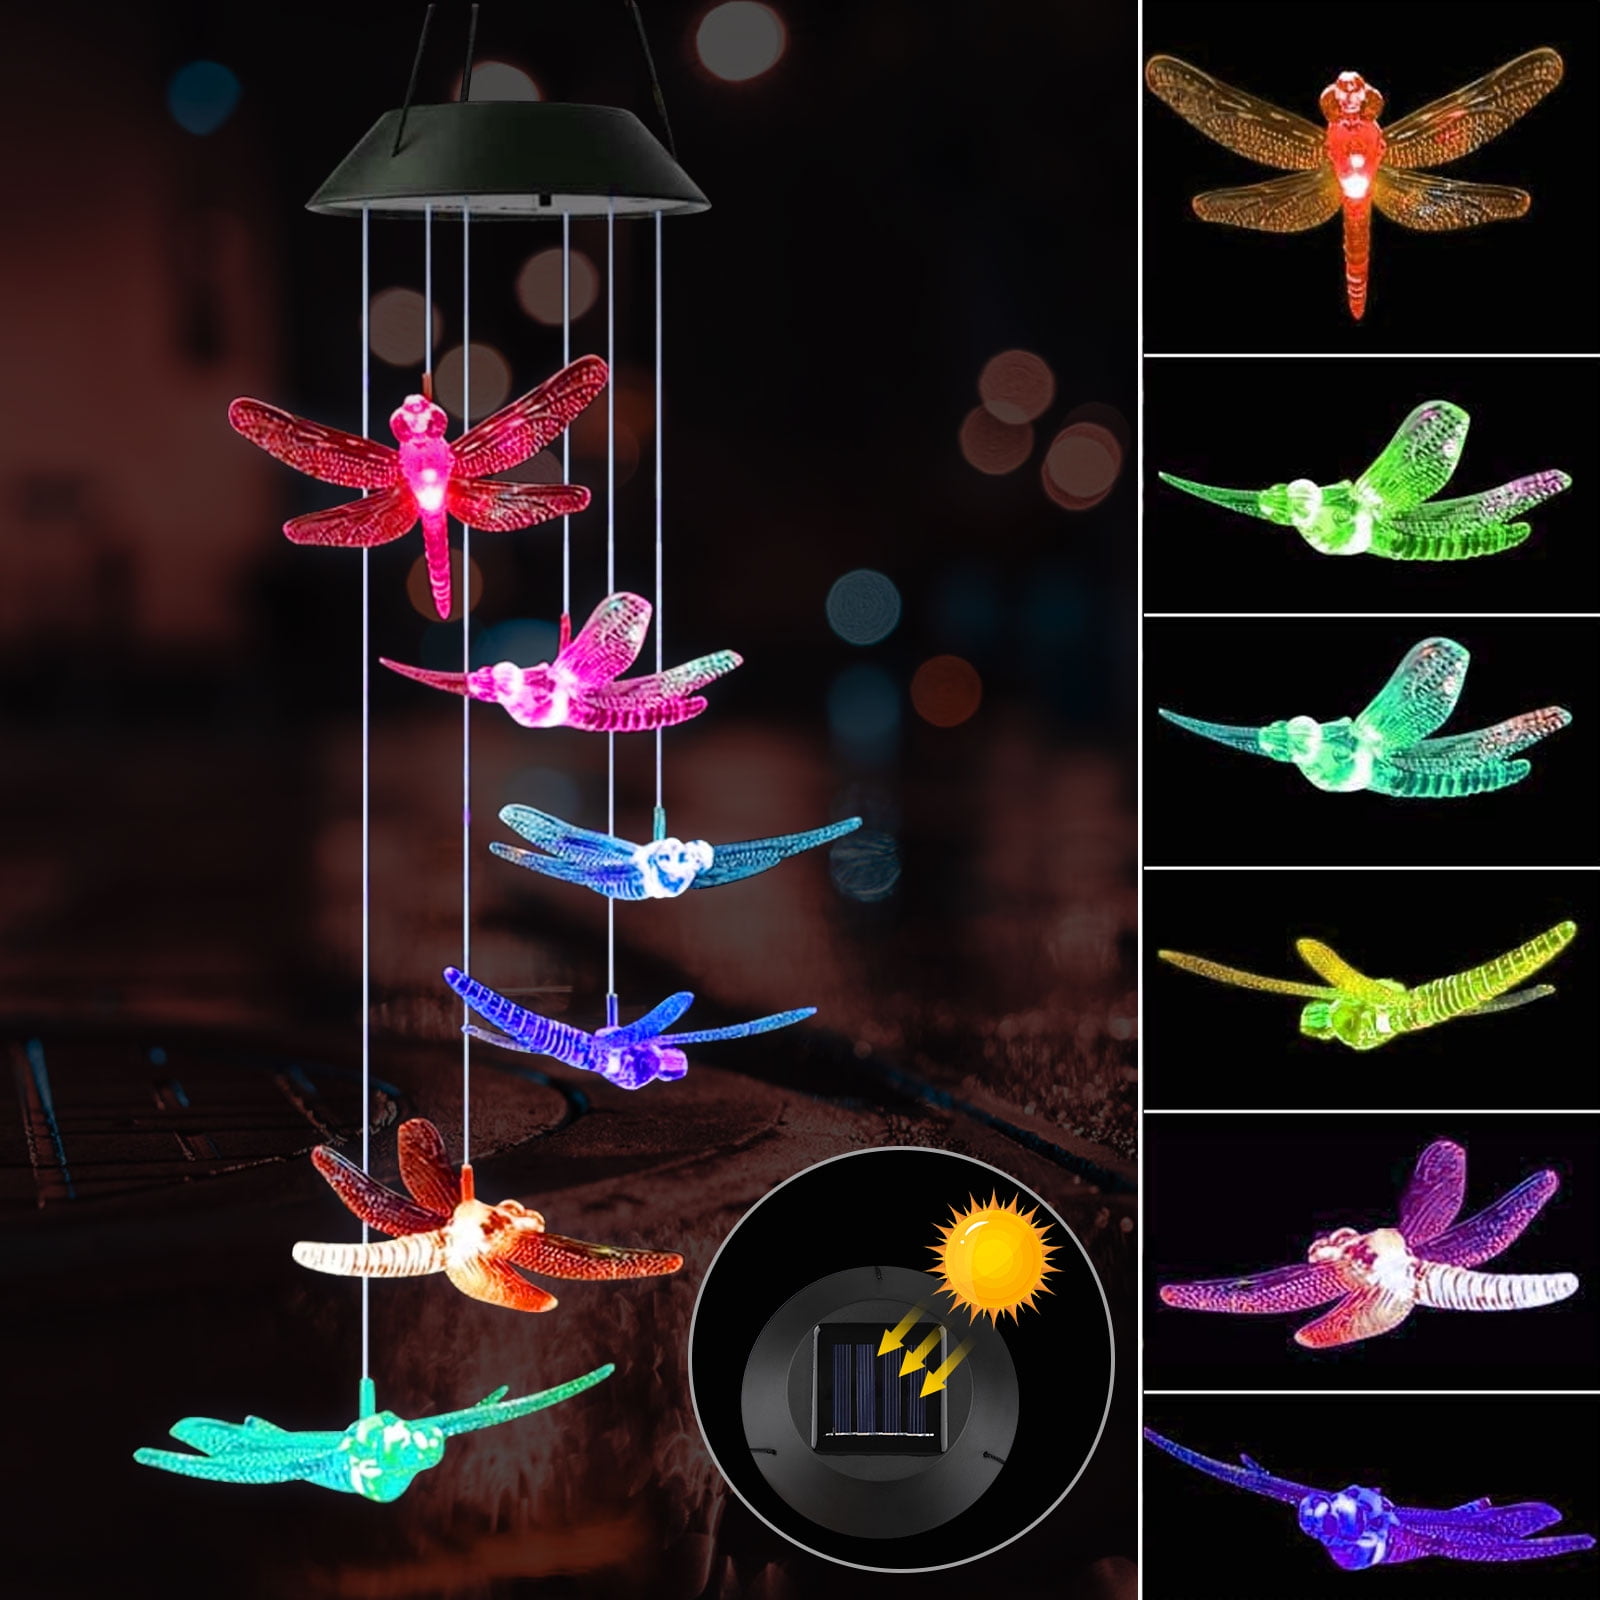 Wind Chime Solar Home Craft Dragonfly Light LED Lamp Waterproof Portable Gift